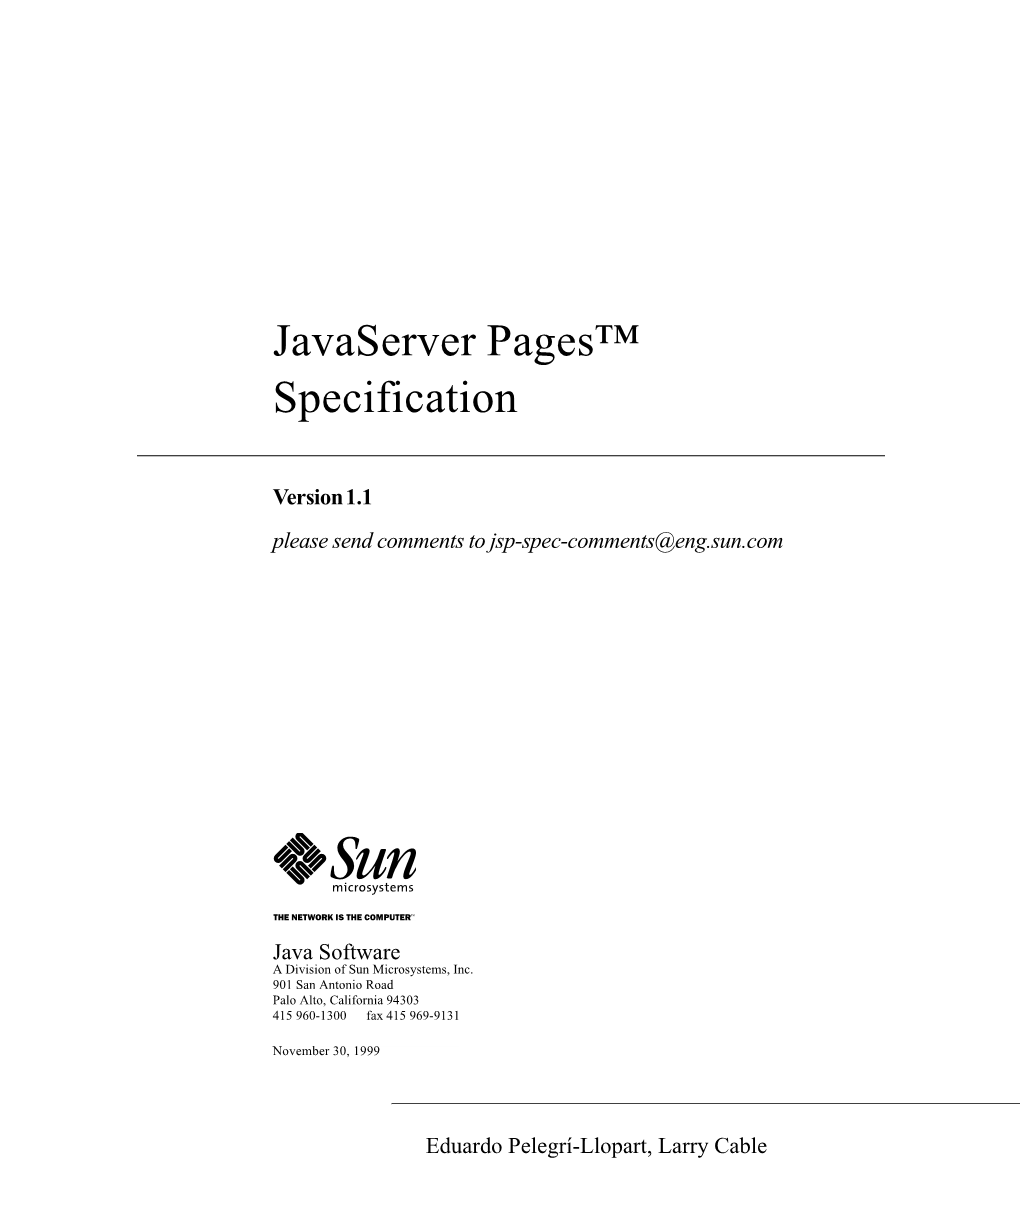 Javaserver Pages™ Specification